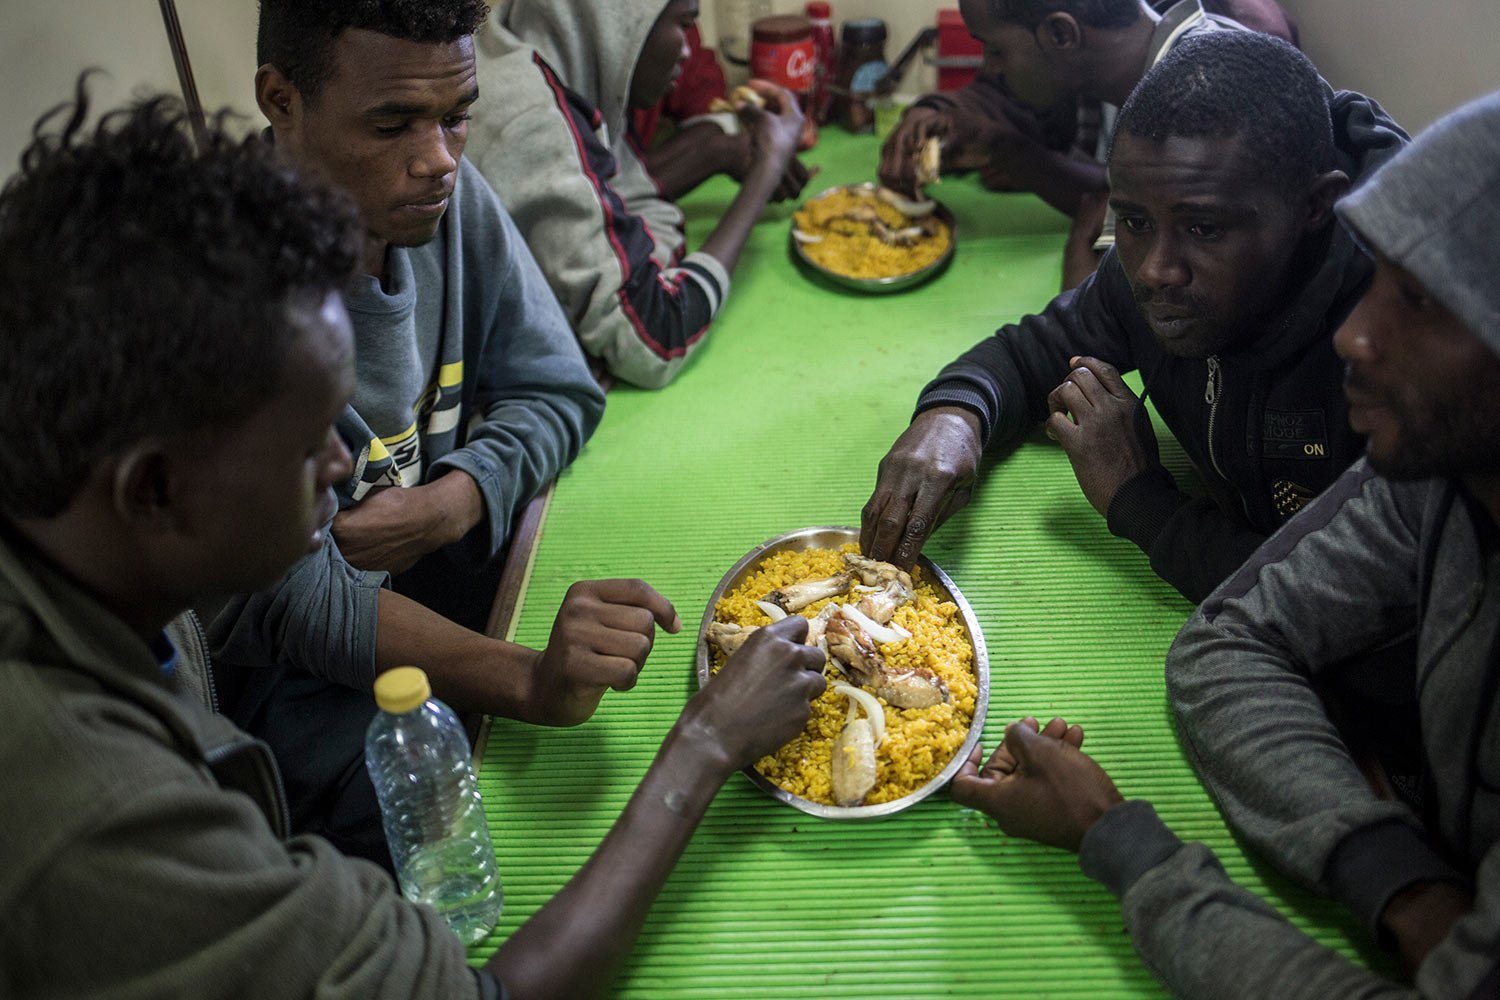  Migrants eat a meal aboard the Spanish fishing vessel Nuestra Madre de Loreto carrying migrants rescued off the coast of Libya, Dec. 1, 2018. One of the migrants was evacuated by helicopter for medical reasons.  (AP Photo/Javier Fergo) 